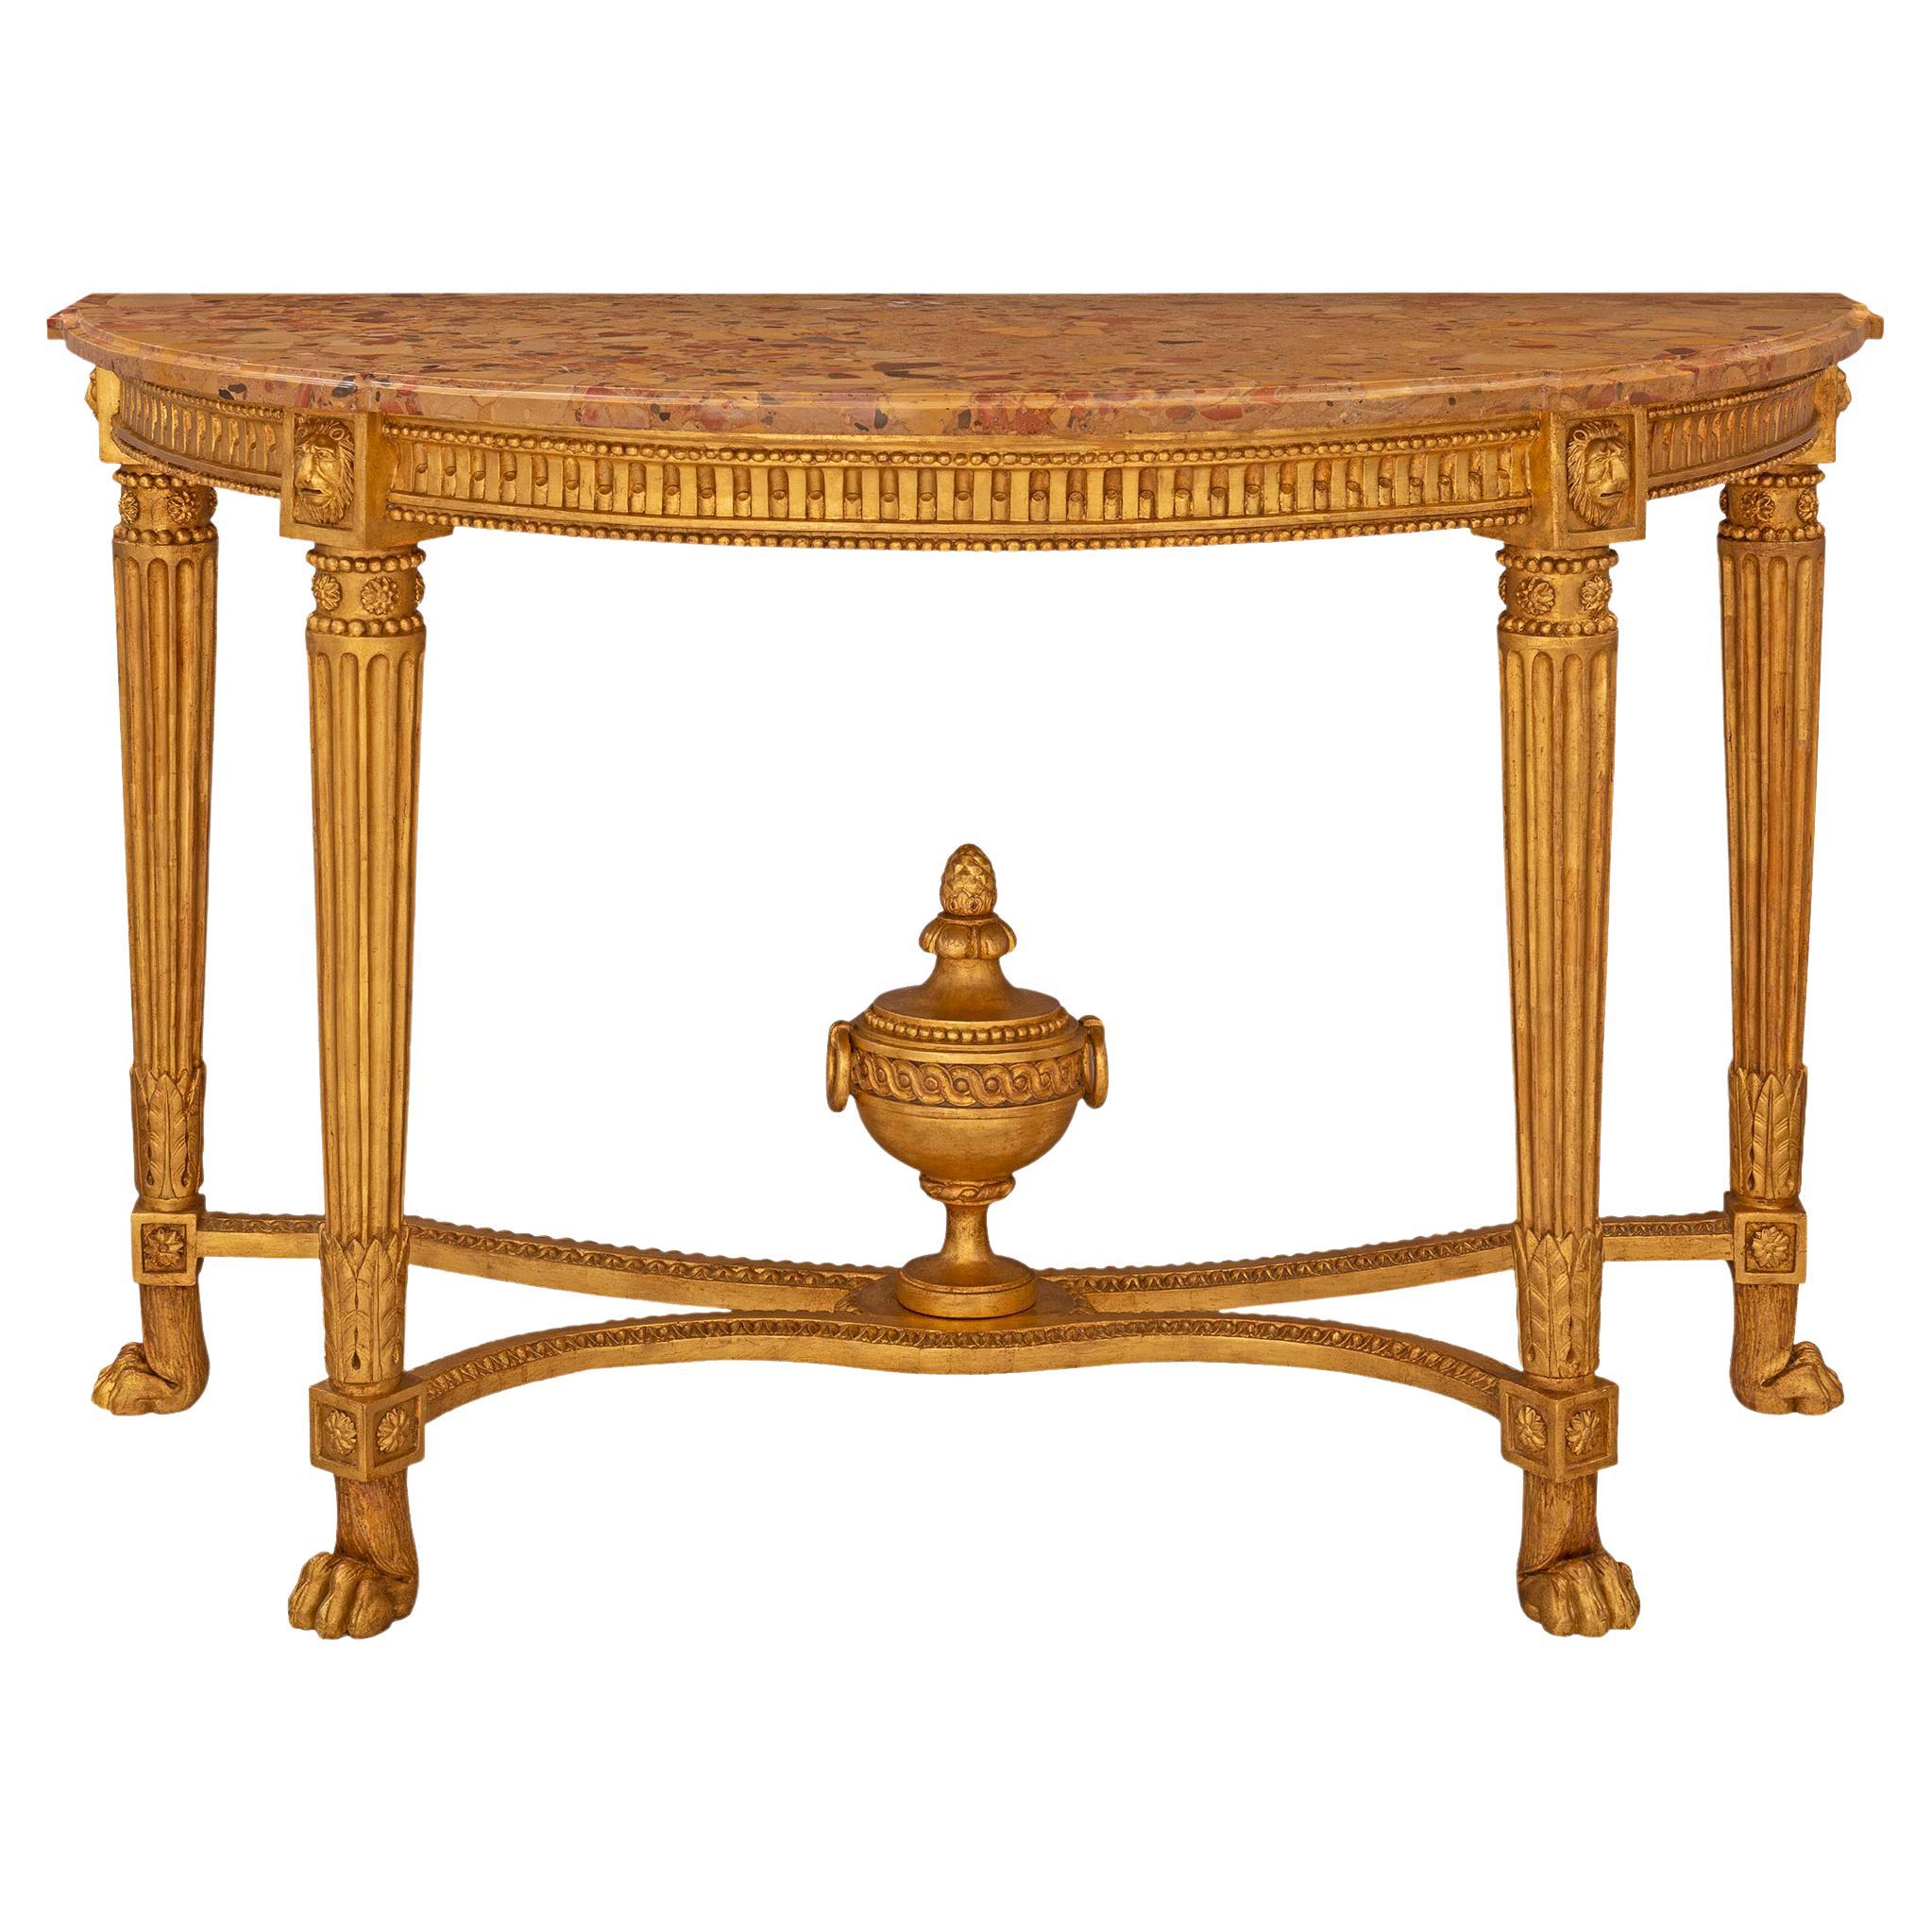 French 18th Century Louis XVI Period Giltwood and Brèche D’alep Marble Console